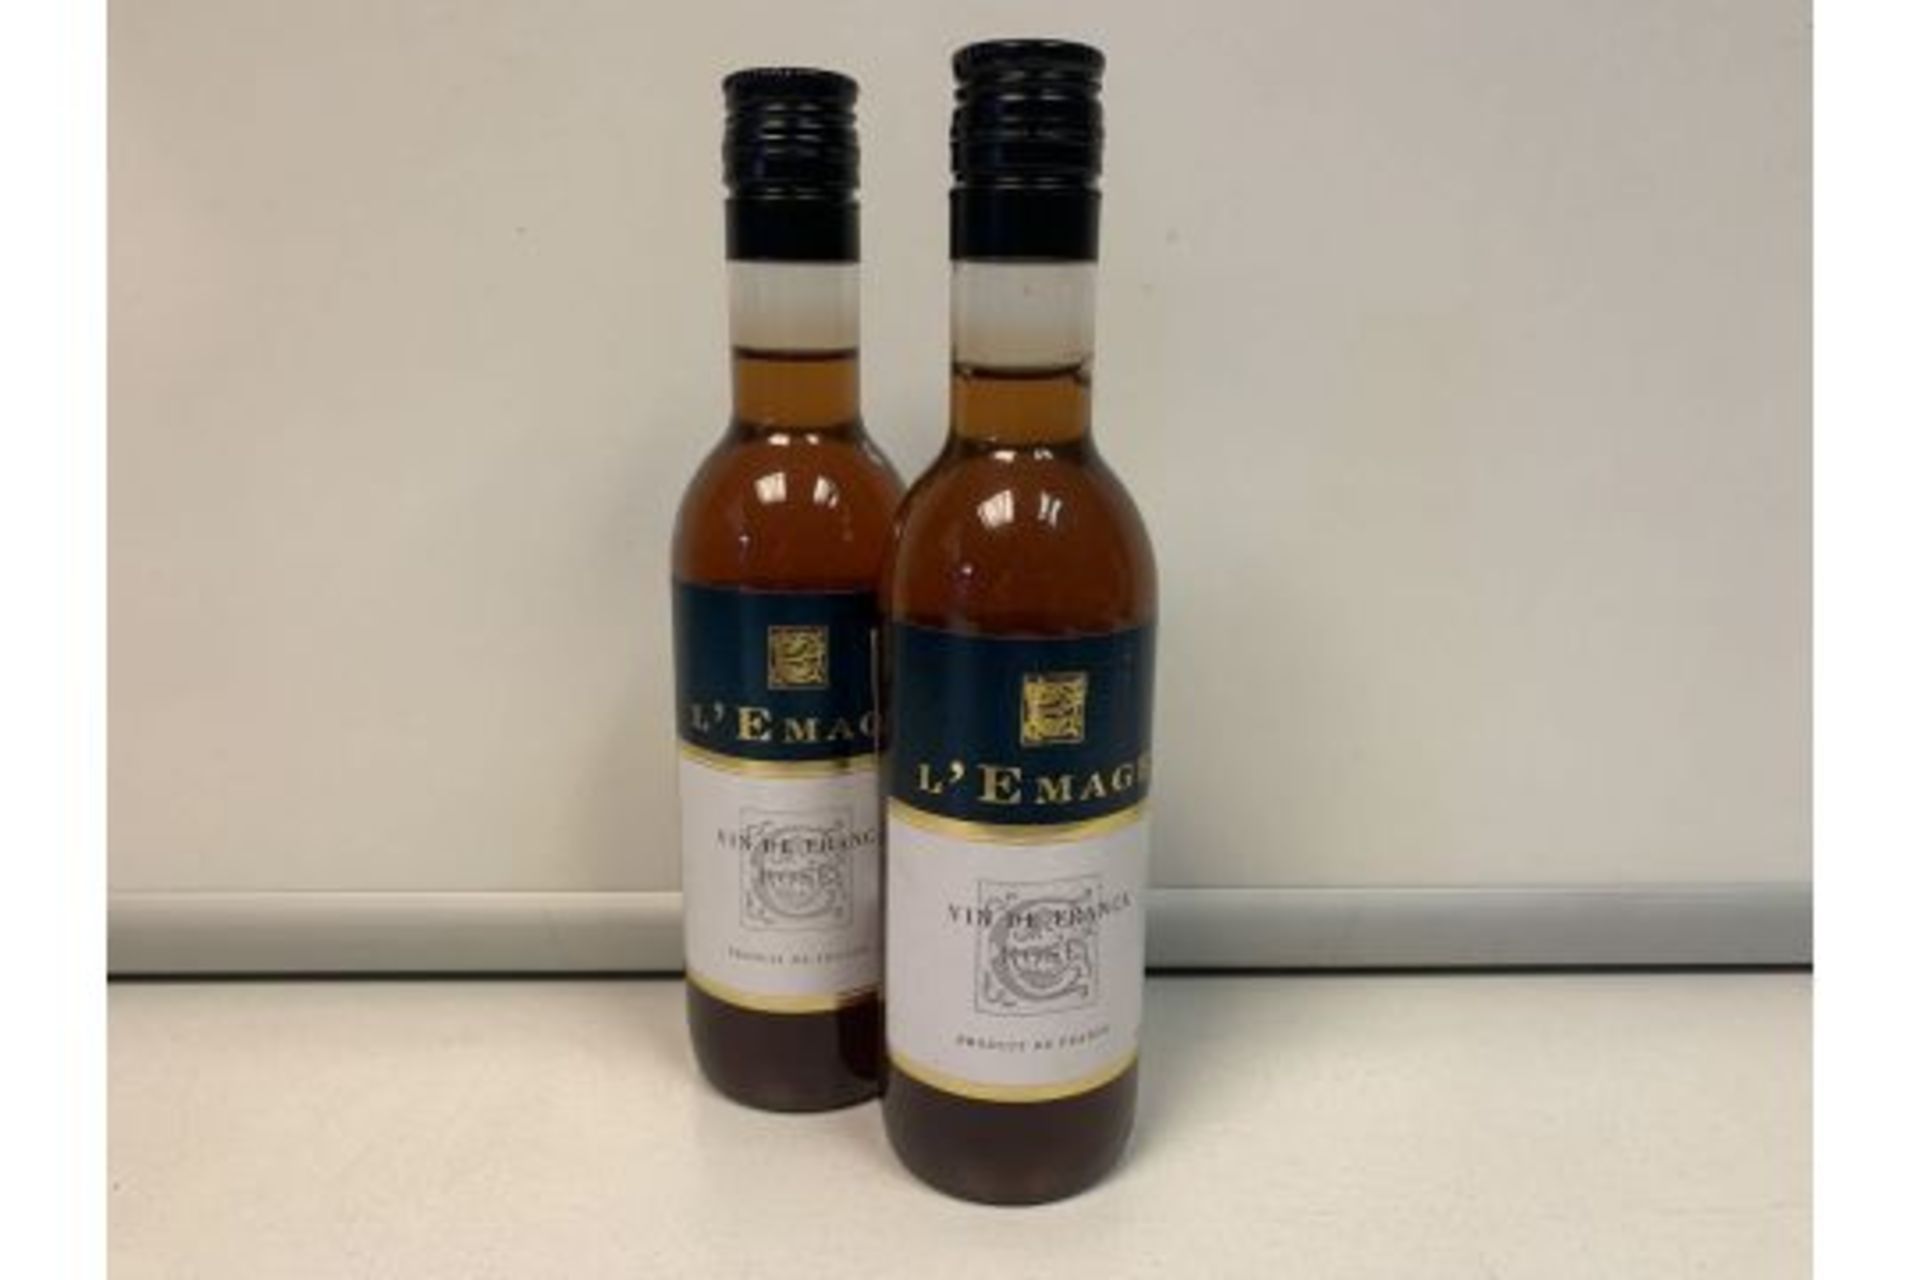 PALLET TO CONTAIN 240 X 187ML BOTTLES OF L'EMAGE VIN DE FRANCE ROSE WINE 11.5% VOLUME. NOTE 18+